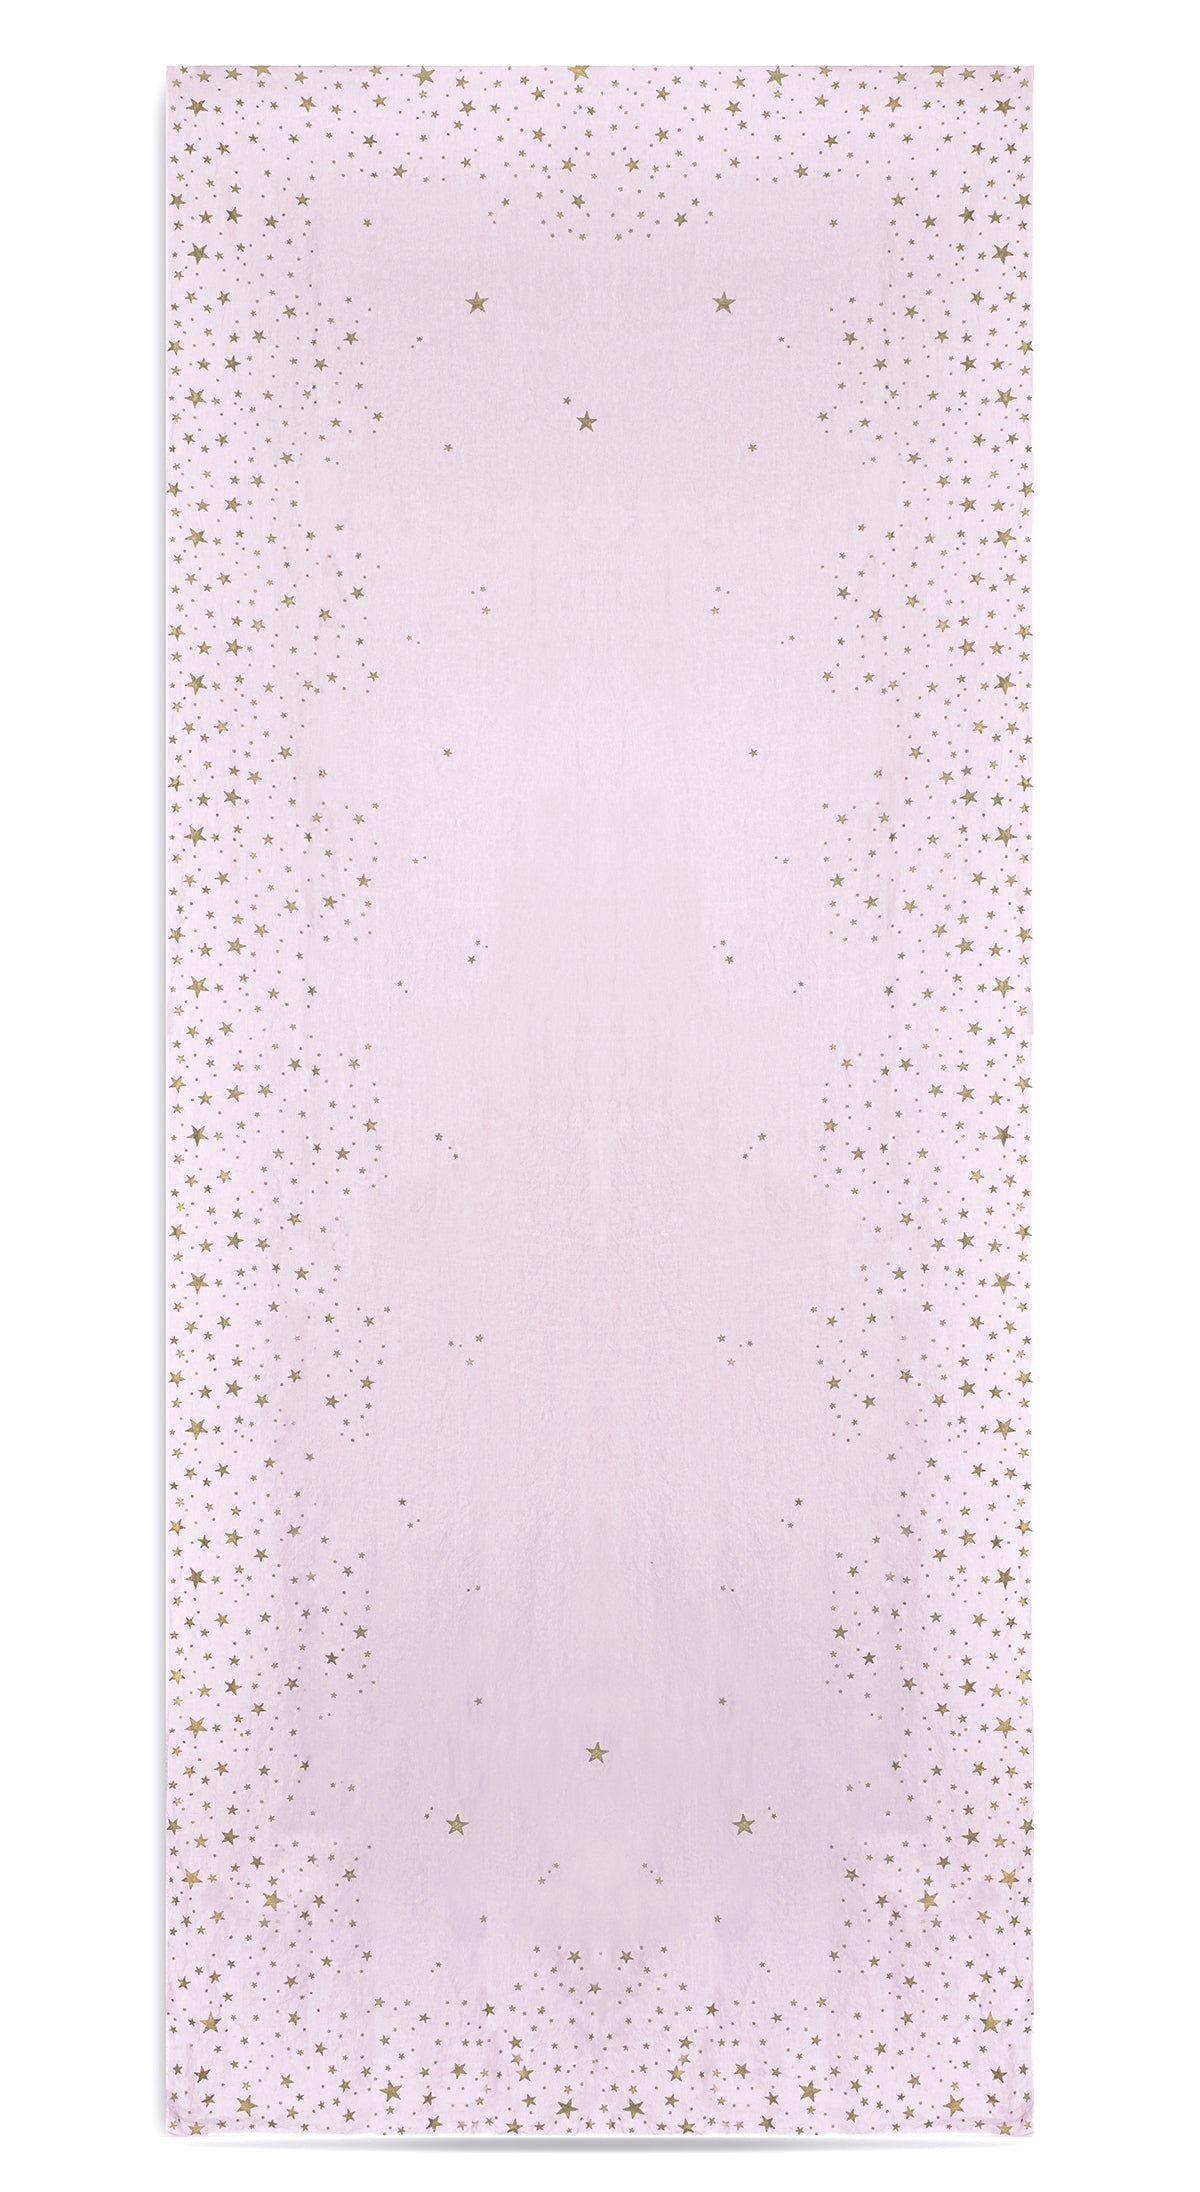 Falling Stars Linen Tablecloth in Light Pink